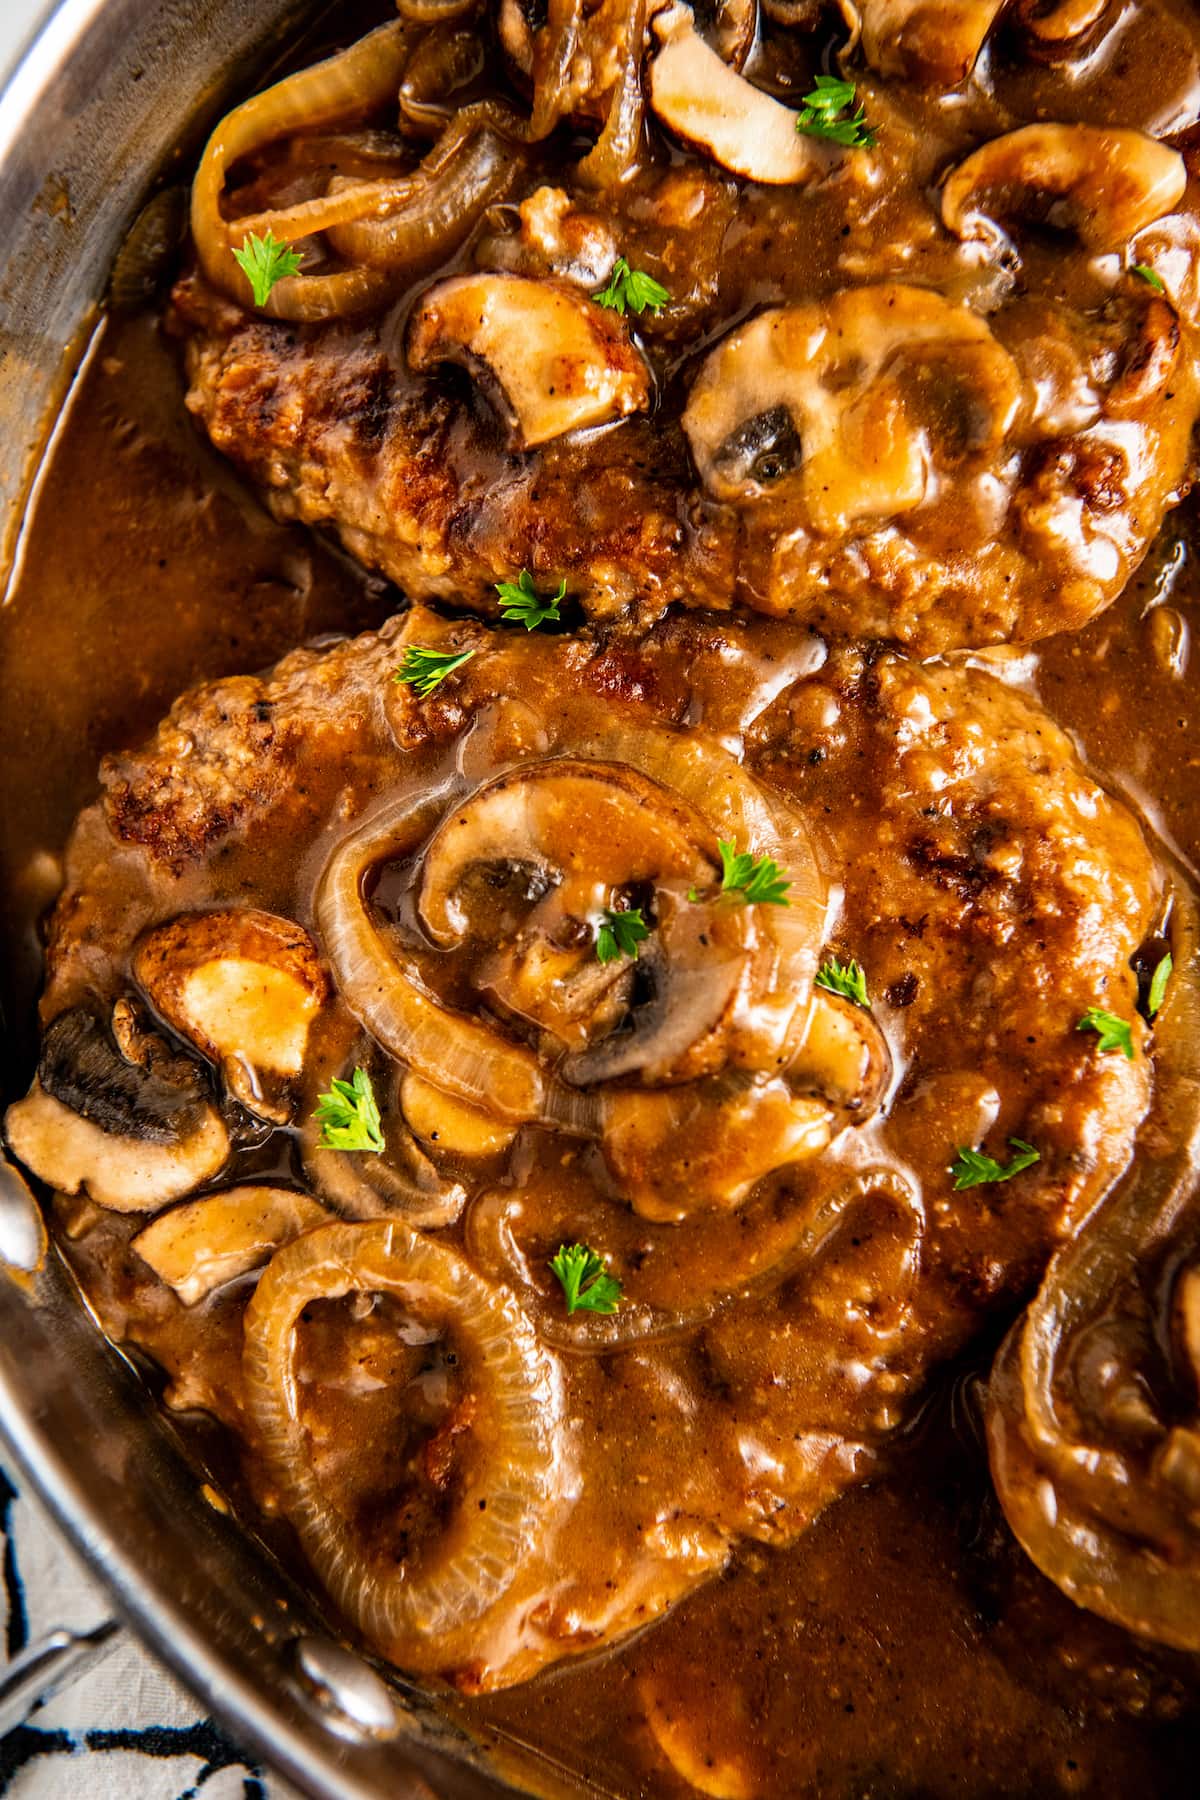 Overhead view of two steaks covered in mushrooms, cooking in gravy